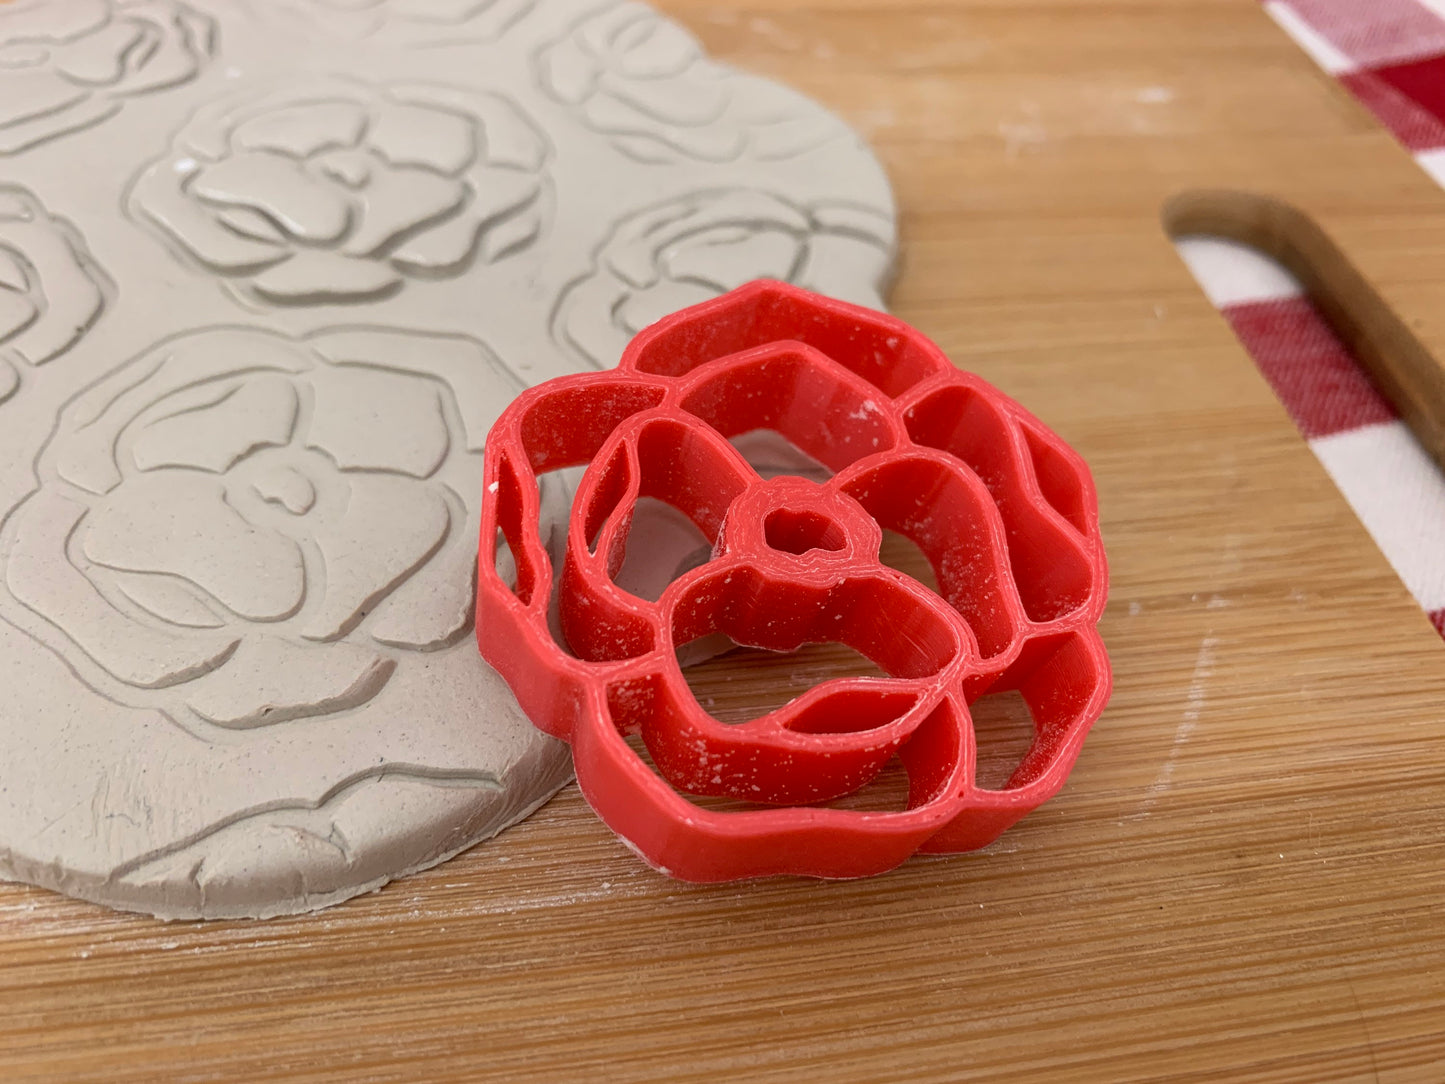 Pottery Stamp, Peony flower design - multiple sizes